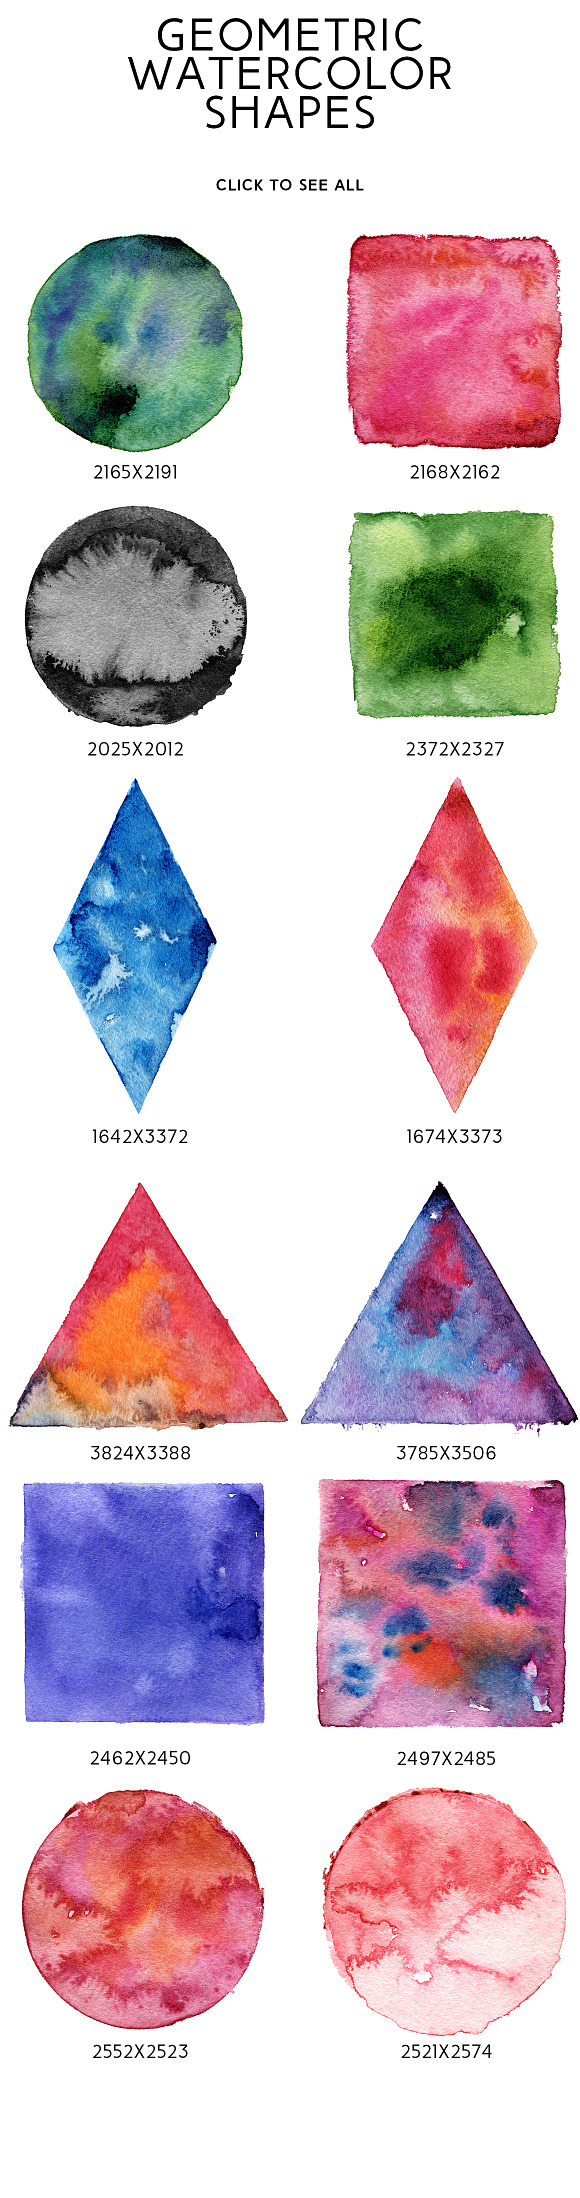 Geometric Watercolor Shapes in Objects - product preview 3